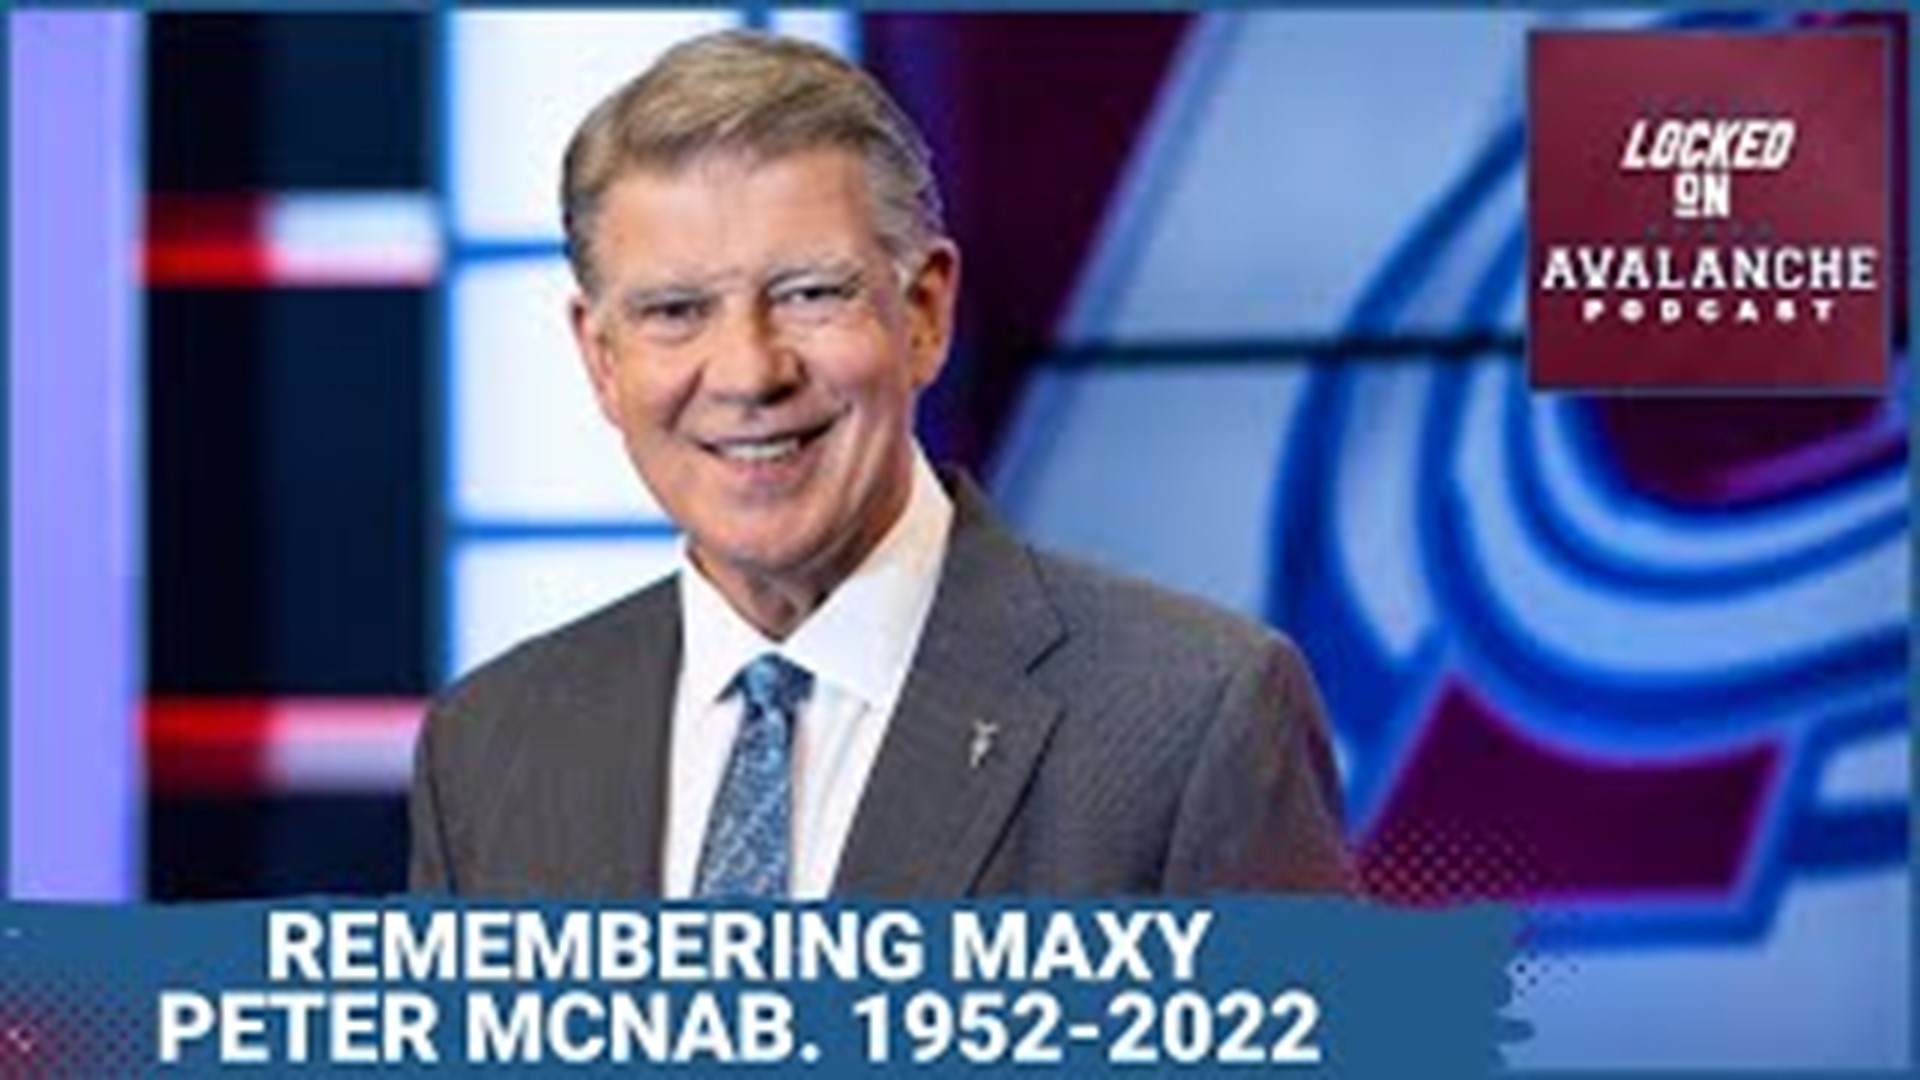 Peter McNab, the legendary Boston Bruin and Avalanche play-by-play announcer since the Avs moved to Colorado, passed away Sunday night.